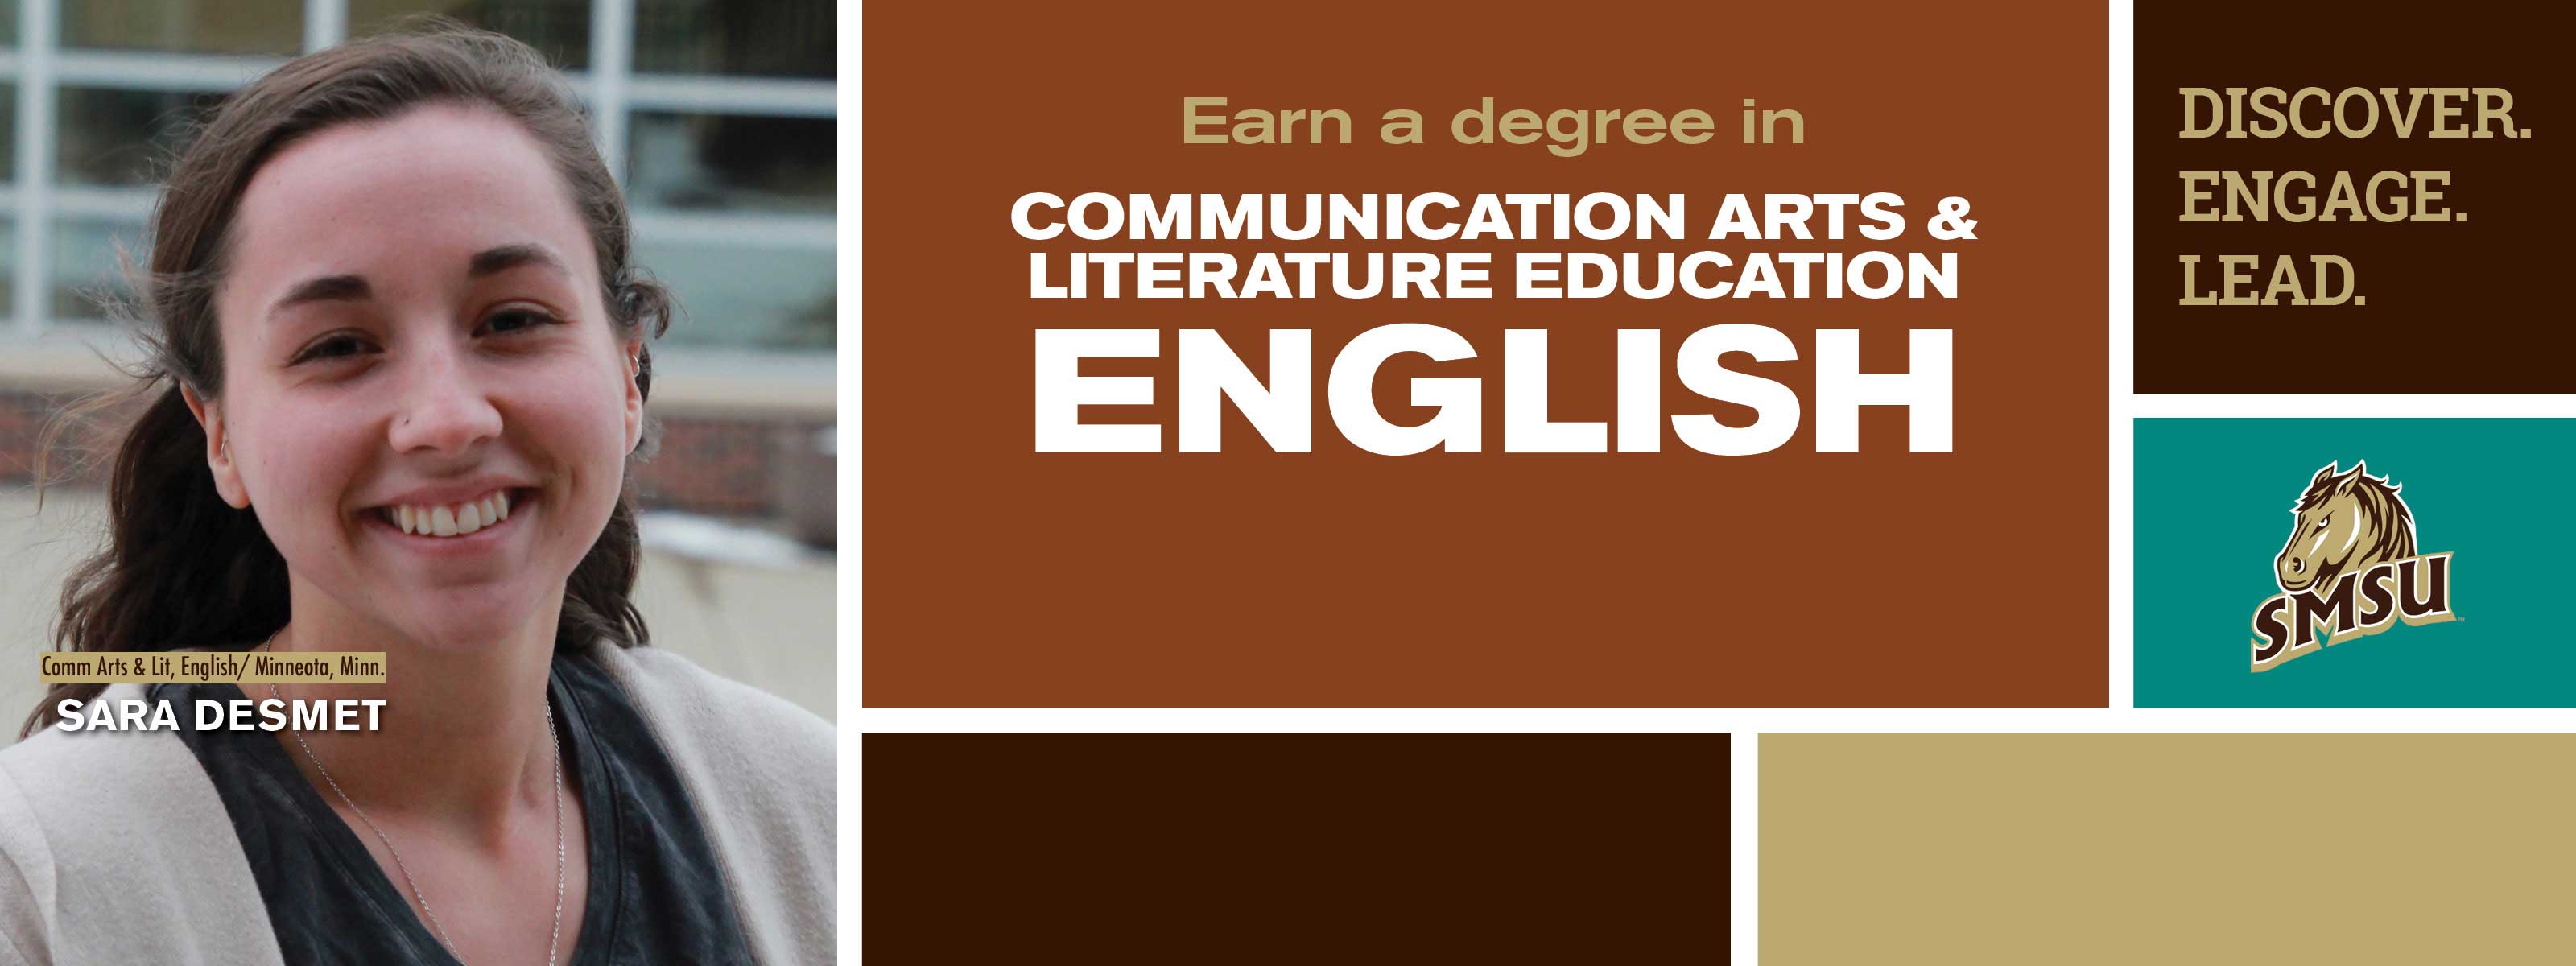 Earn A Degree In Communication Arts and Literature Education English - Discover. Engage. Lead.